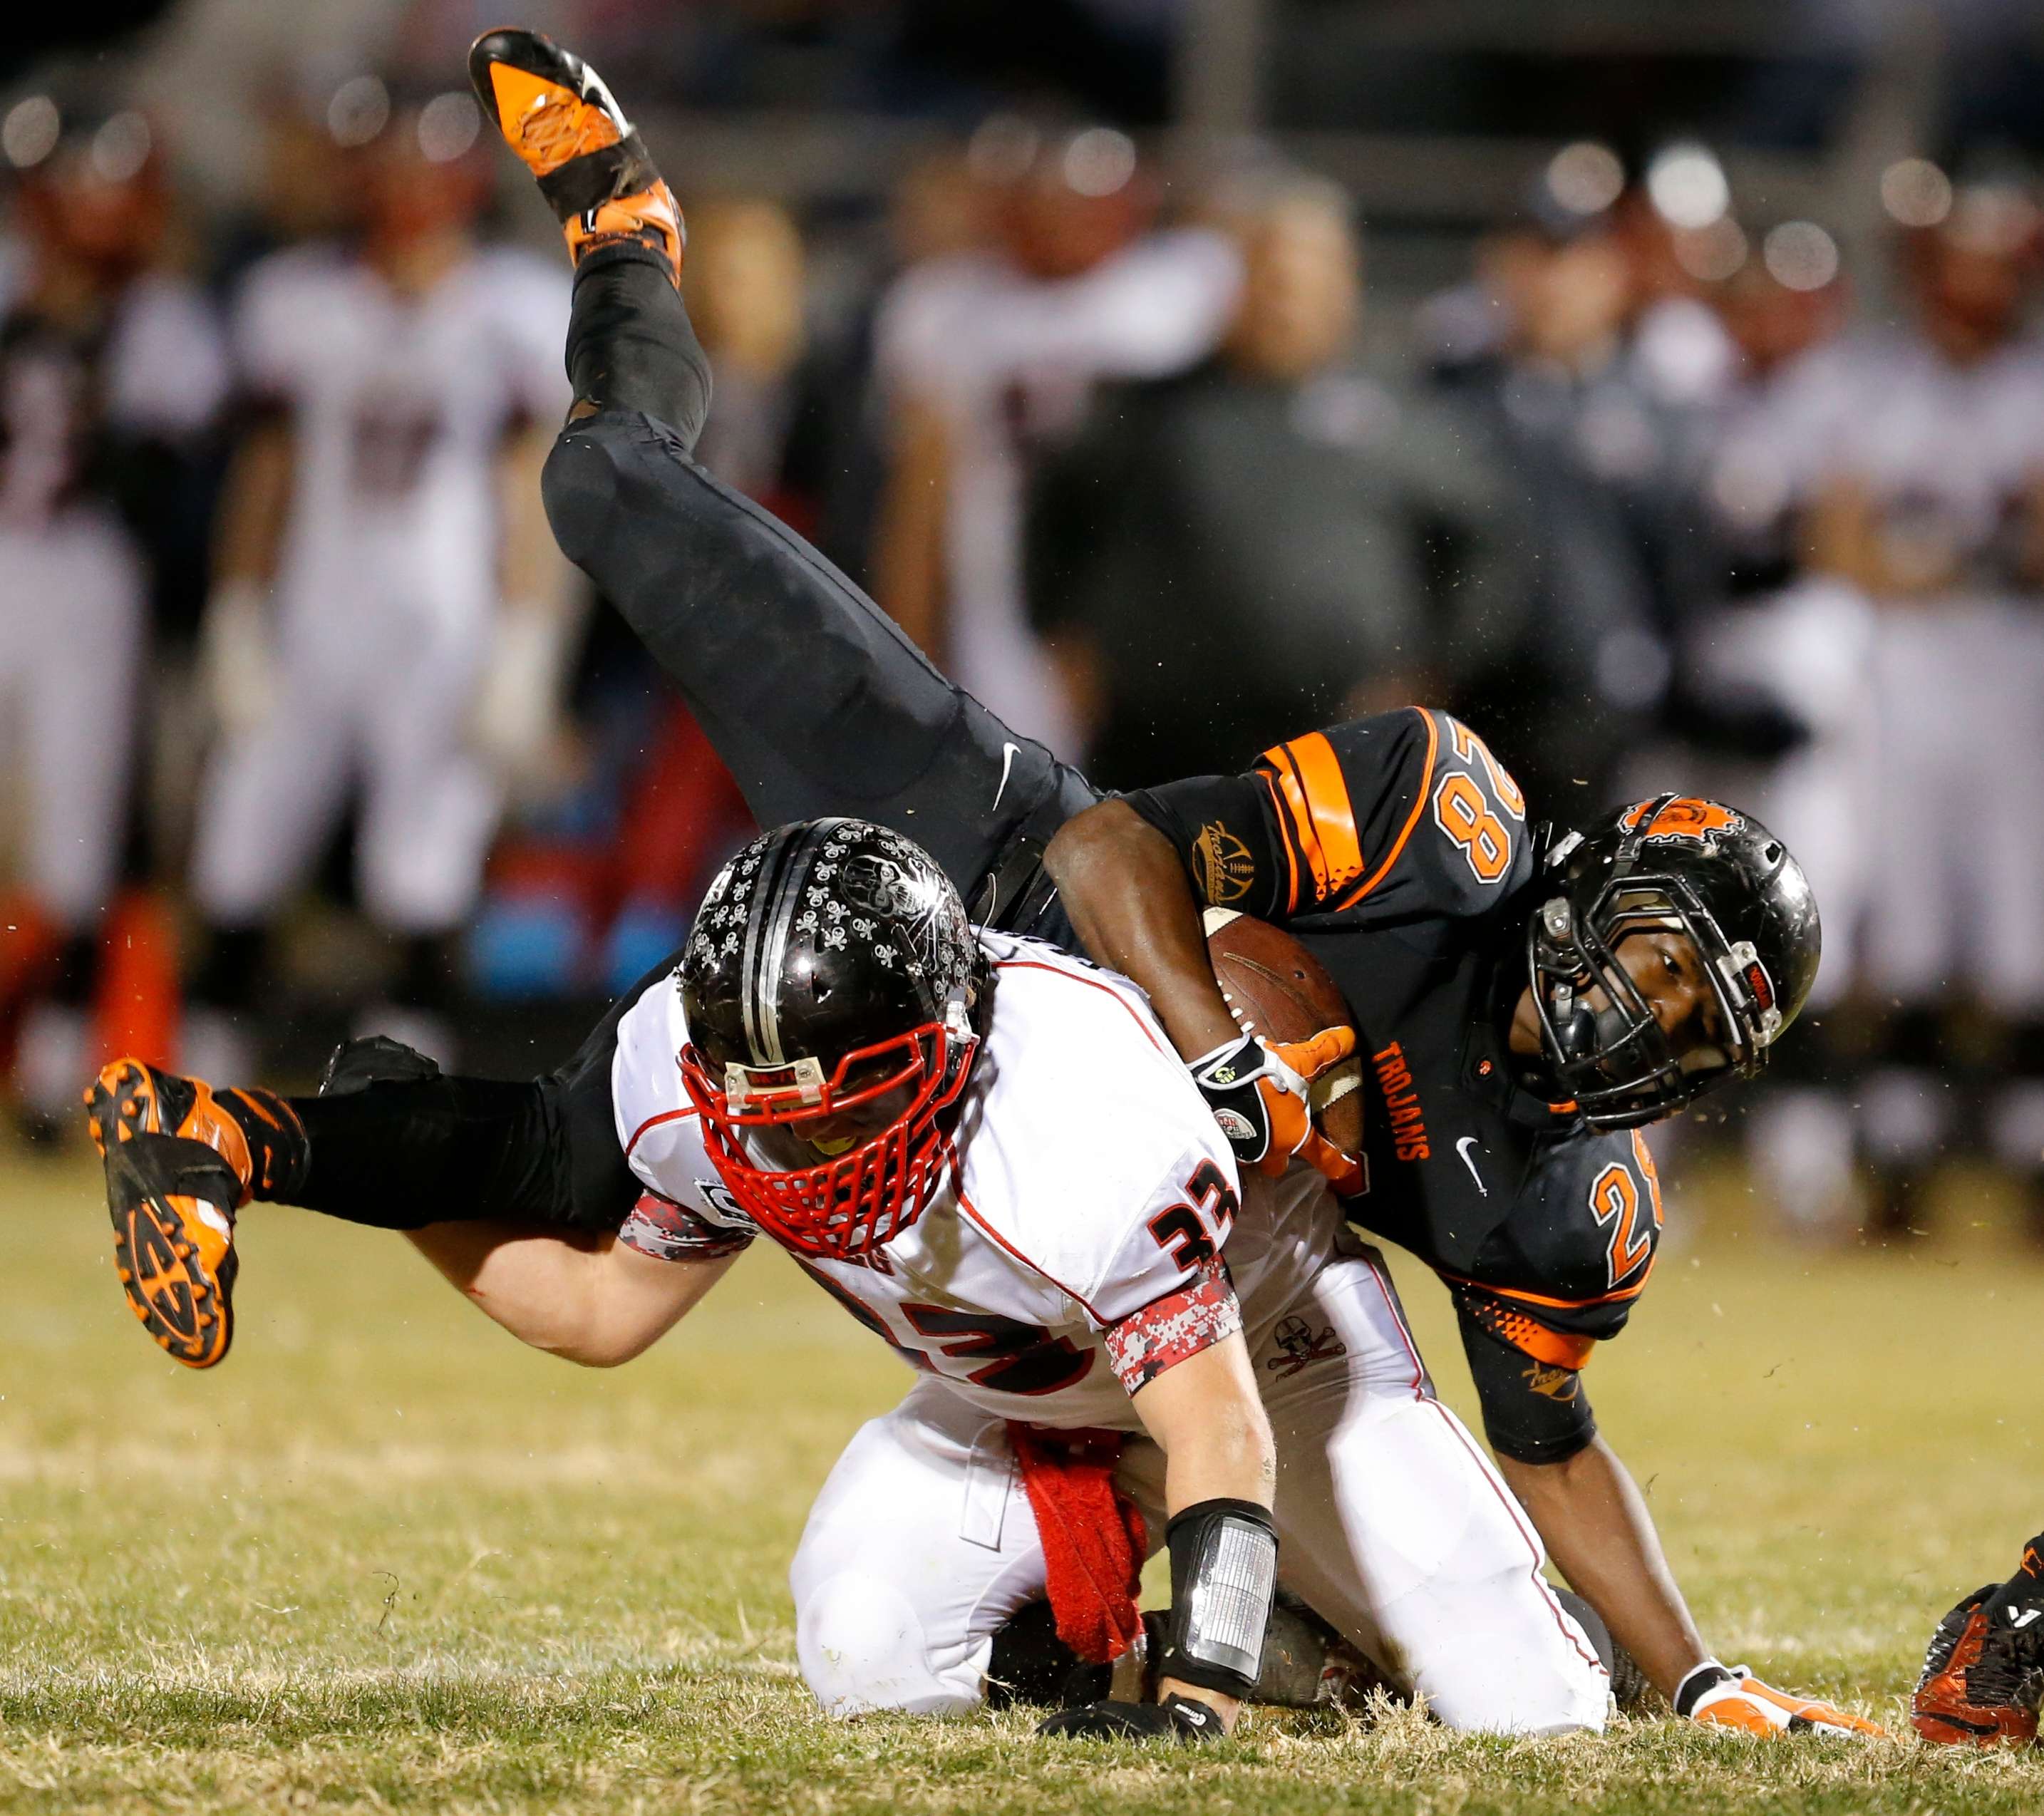 A Locust Grove player upends a Douglas player during a disputed November 28 playoff game.(AP Photo/The Oklahoman, Bryan Terry) LOCAL INTERNET OUT; LOCAL STATIONS OUT (KFOR,KOCO,KWTV,KOKH, KAUT OUT); LOCAL PRINT OUT (EDMOND SUN, NORMAN TRANSCRIPT, OKLAHOMA GAZETTE, SHAWNEE NEWS-STAR THE JOURNAL RECORD OUT); TABLOIDS OUT